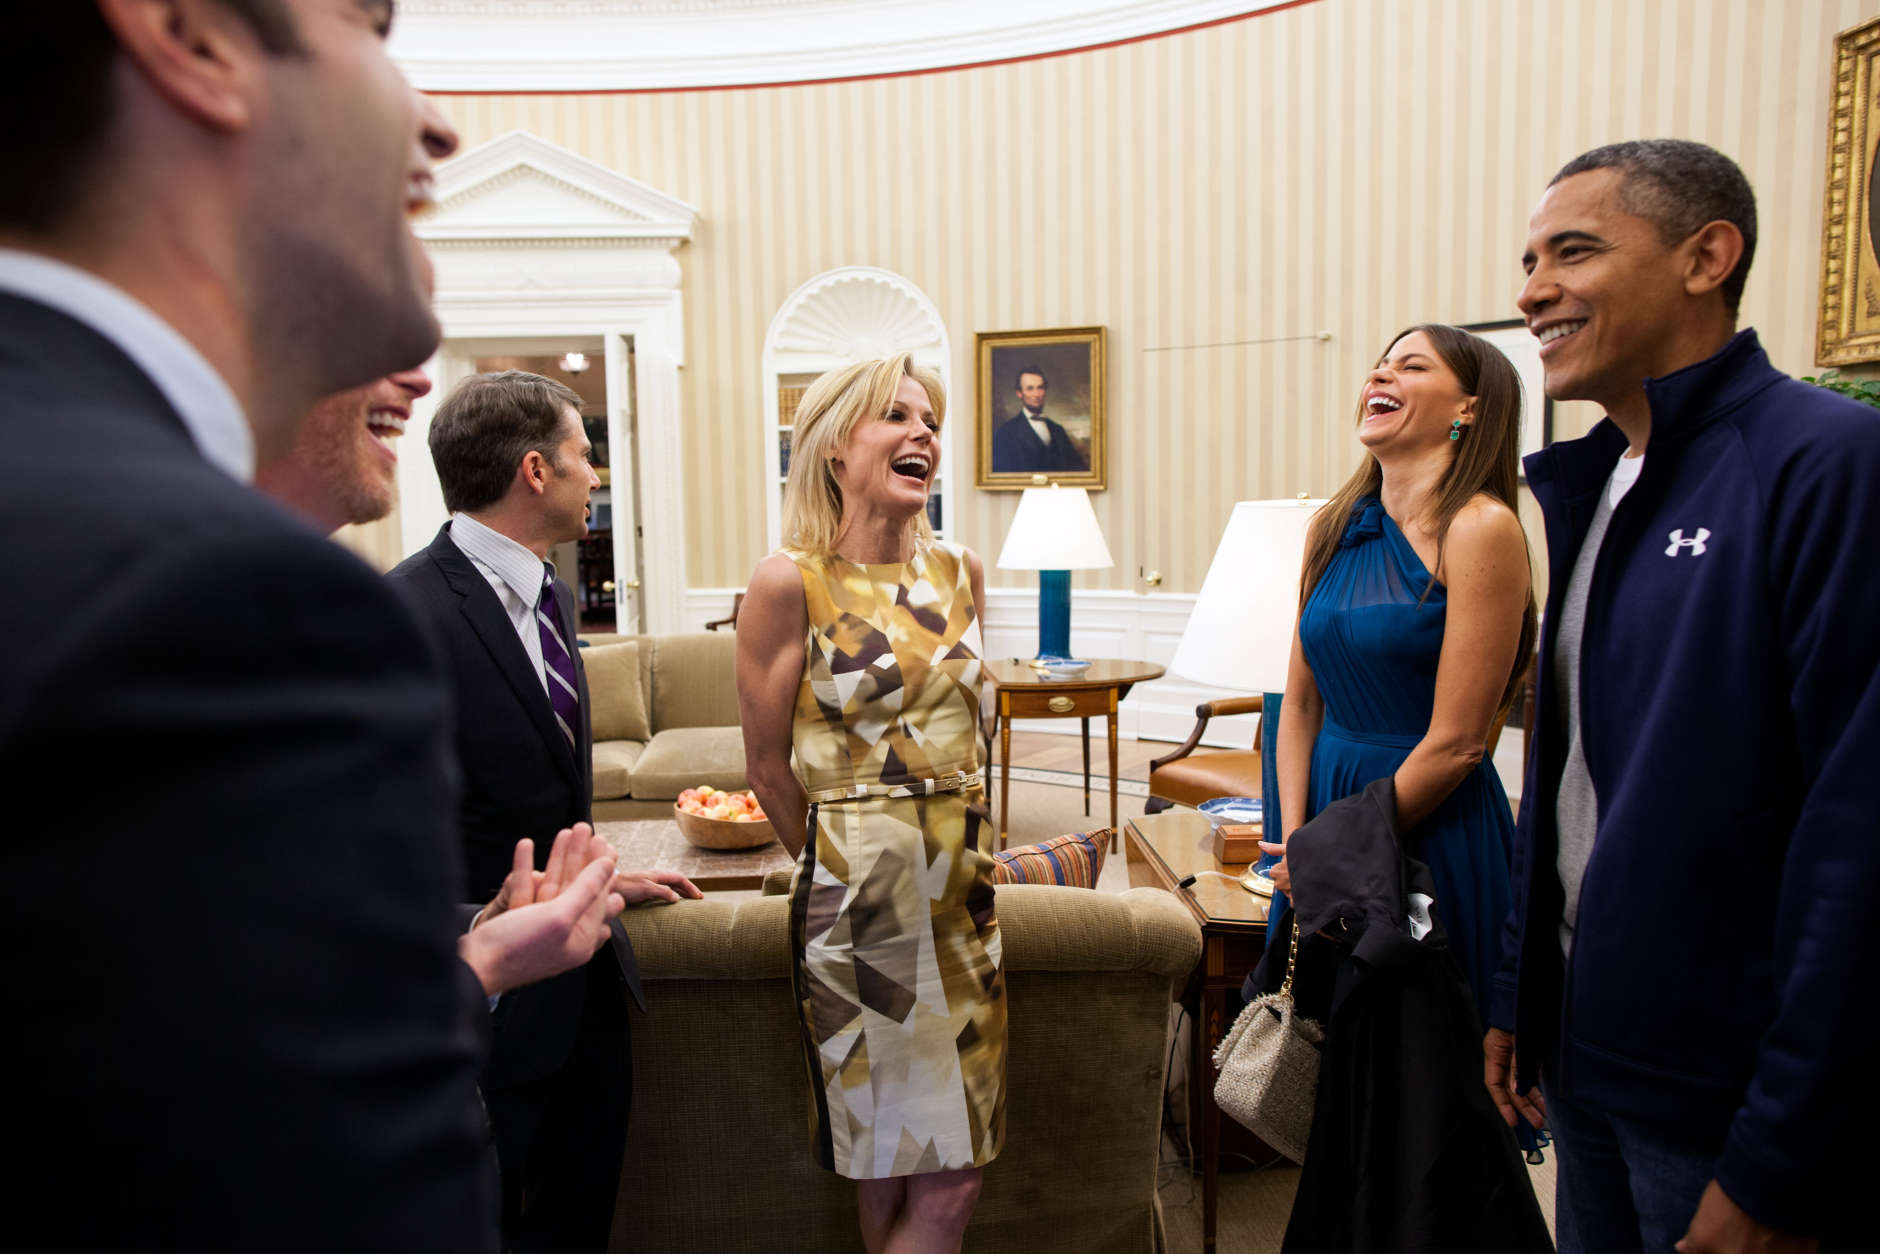 President Barack Obama greets cast members from ABC's sitcom "Modern Family", including Julie Bowen, center, and Sofia Vergara, right,  in the Oval Office, Saturday, April 28, 2012. The group was in town to attend the White House Correspondents' Dinner. 
(Official White House Photo by Pete Souza)

This official White House photograph is being made available only for publication by news organizations and/or for personal use printing by the subject(s) of the photograph. The photograph may not be manipulated in any way and may not be used in commercial or political materials, advertisements, emails, products, promotions that in any way suggests approval or endorsement of the President, the First Family, or the White House.